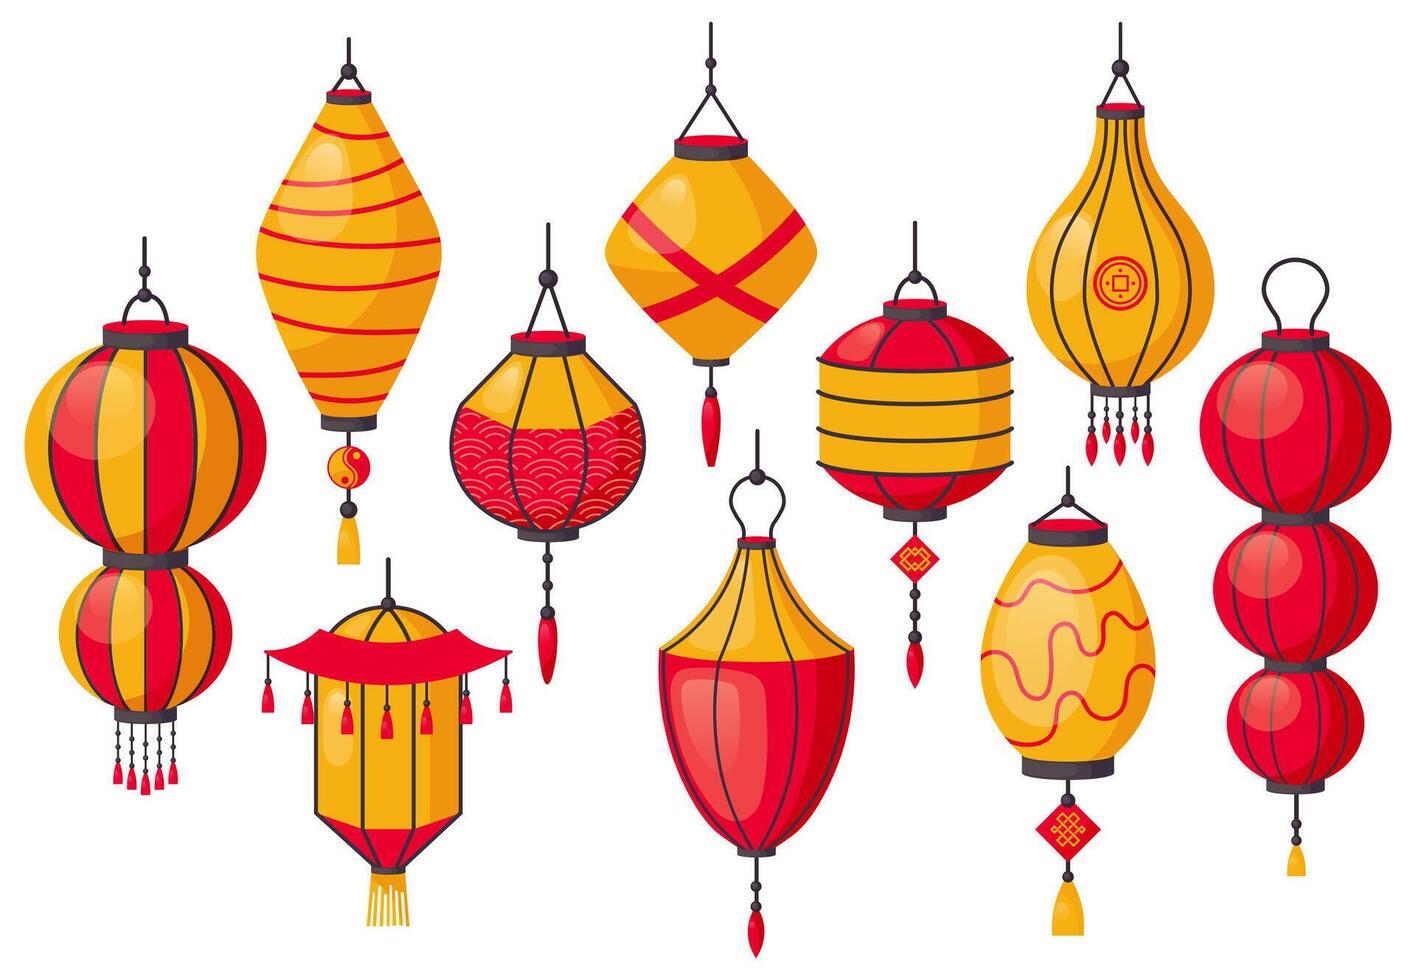 Oriental traditional lantern. Chinese paper lanterns, asian street decoration, chinatown lanterns. Traditional paper lamp vector illustrations